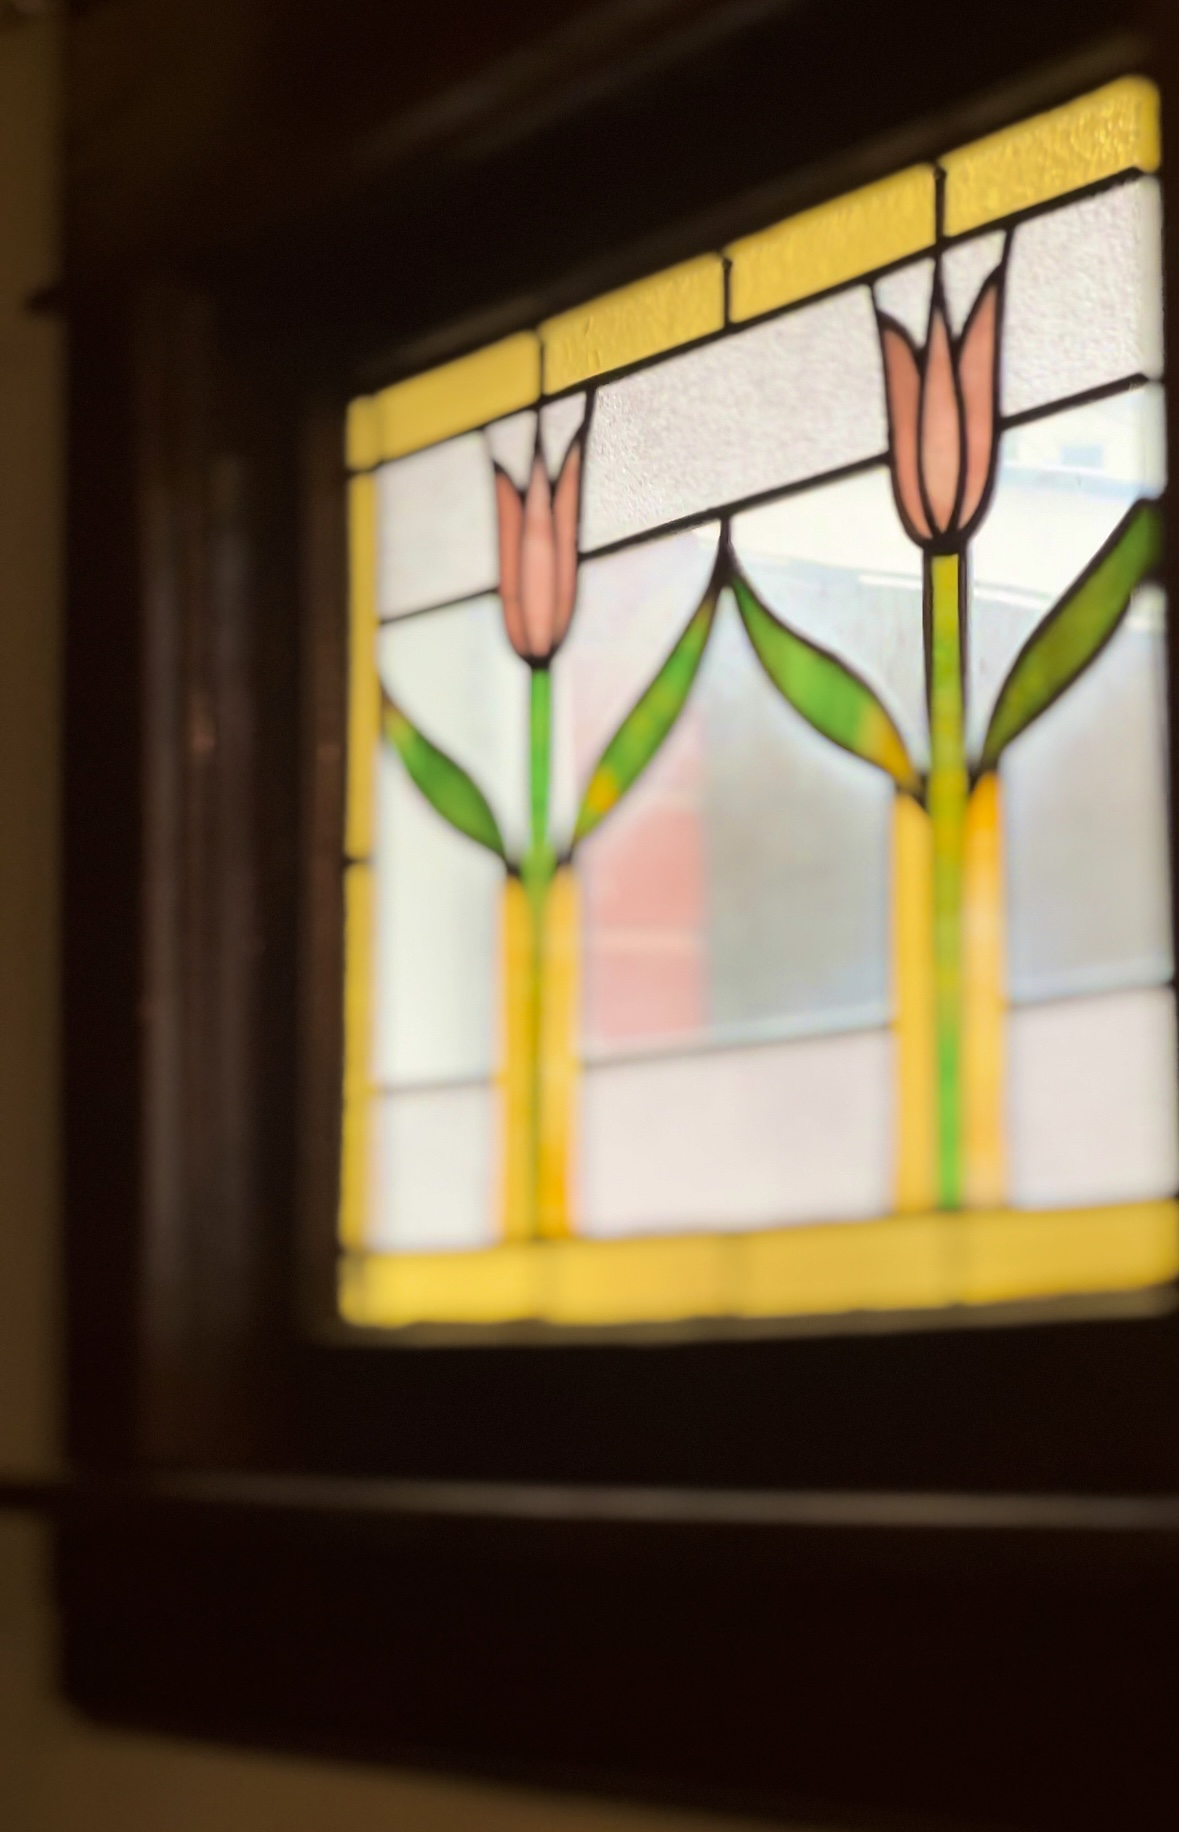 Elegant stained glass flower window decor graces the 1930s Airbnb living room with vibrant colors and timeless beauty.